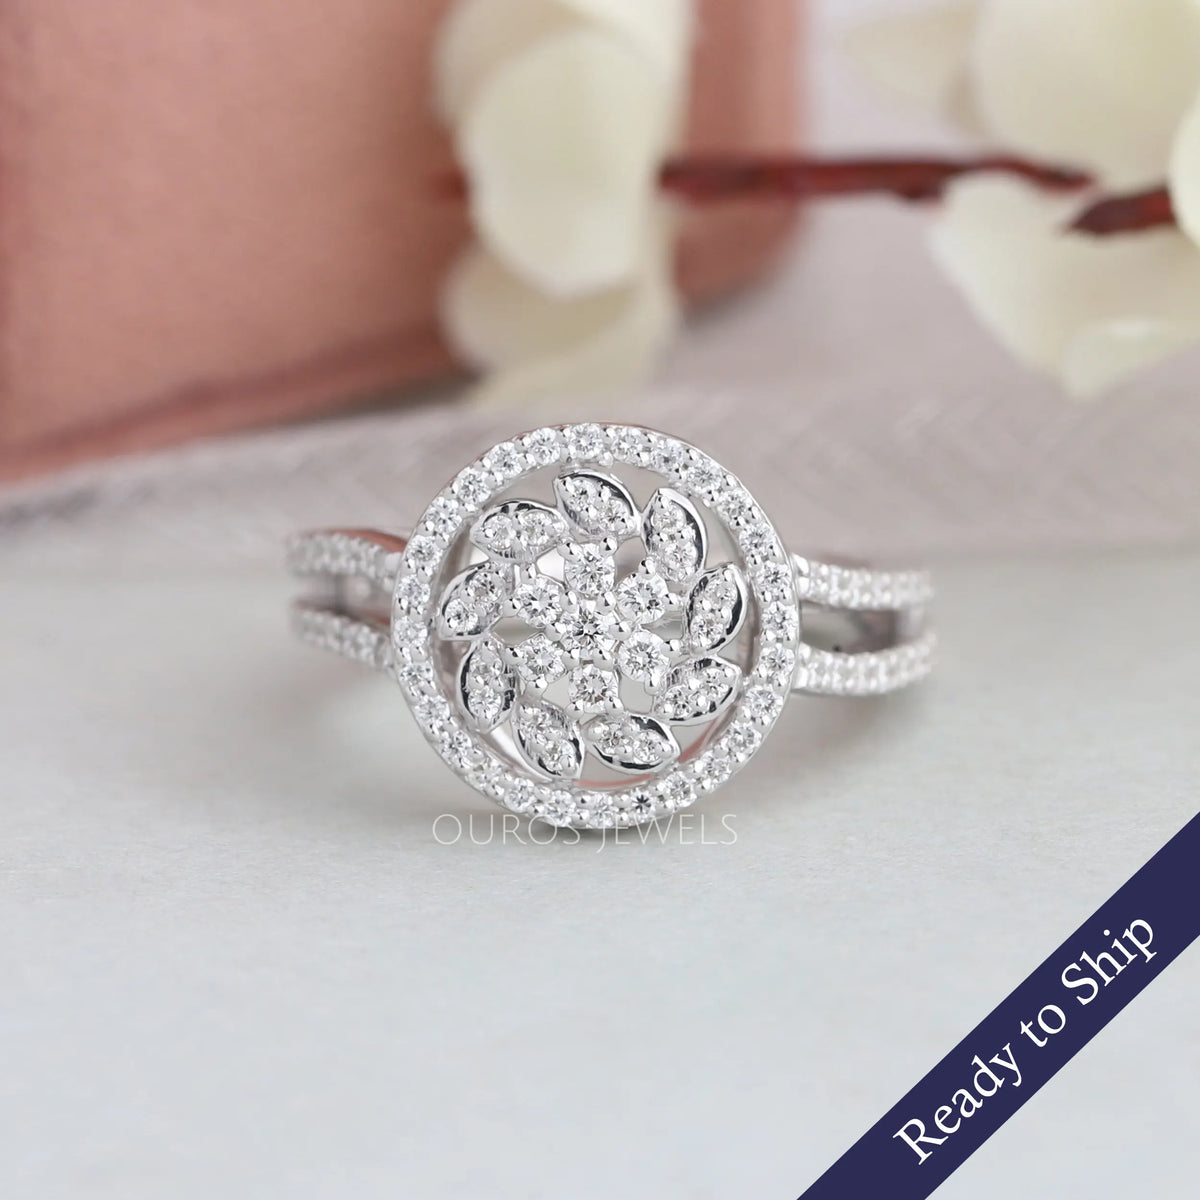 P.P. Jewellers Chandigarh - This diamond ring stands as a breathtaking  symbol of eternal beauty and timeless grace. Its dazzling gem, meticulously  set in an artful design, radiates a brilliance that mirrors